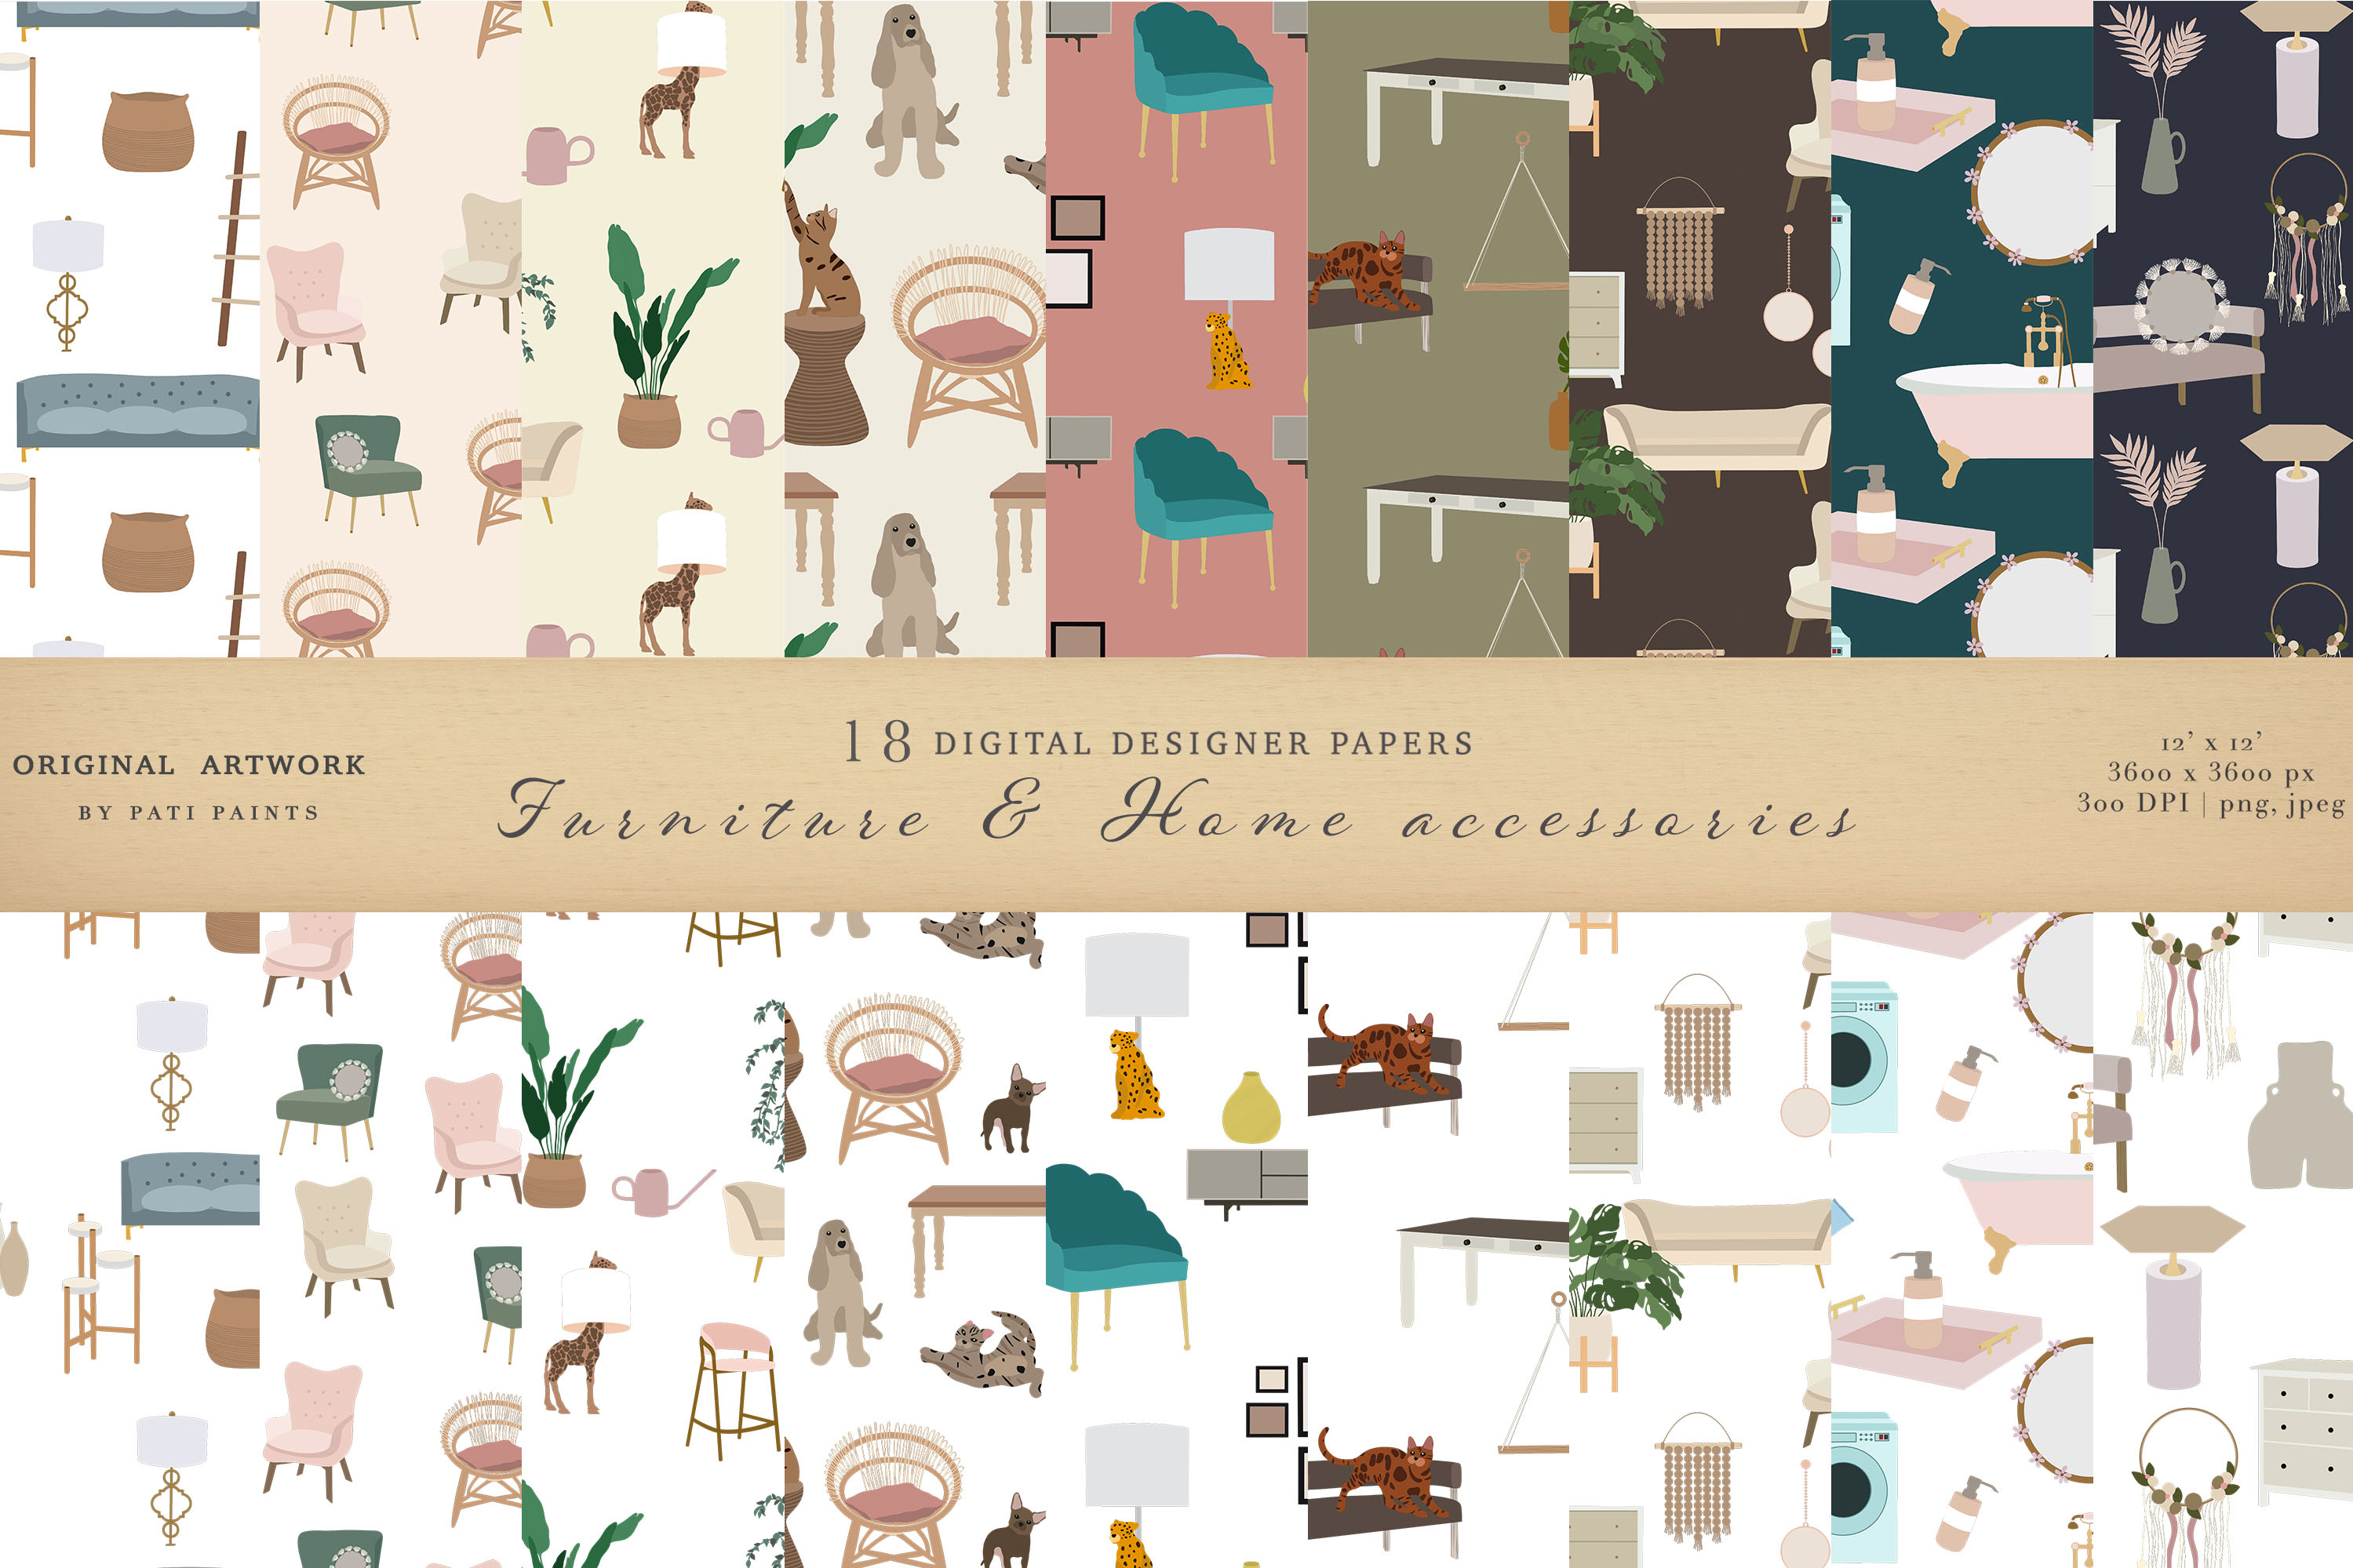 Furniture and Home Accessories patterns.